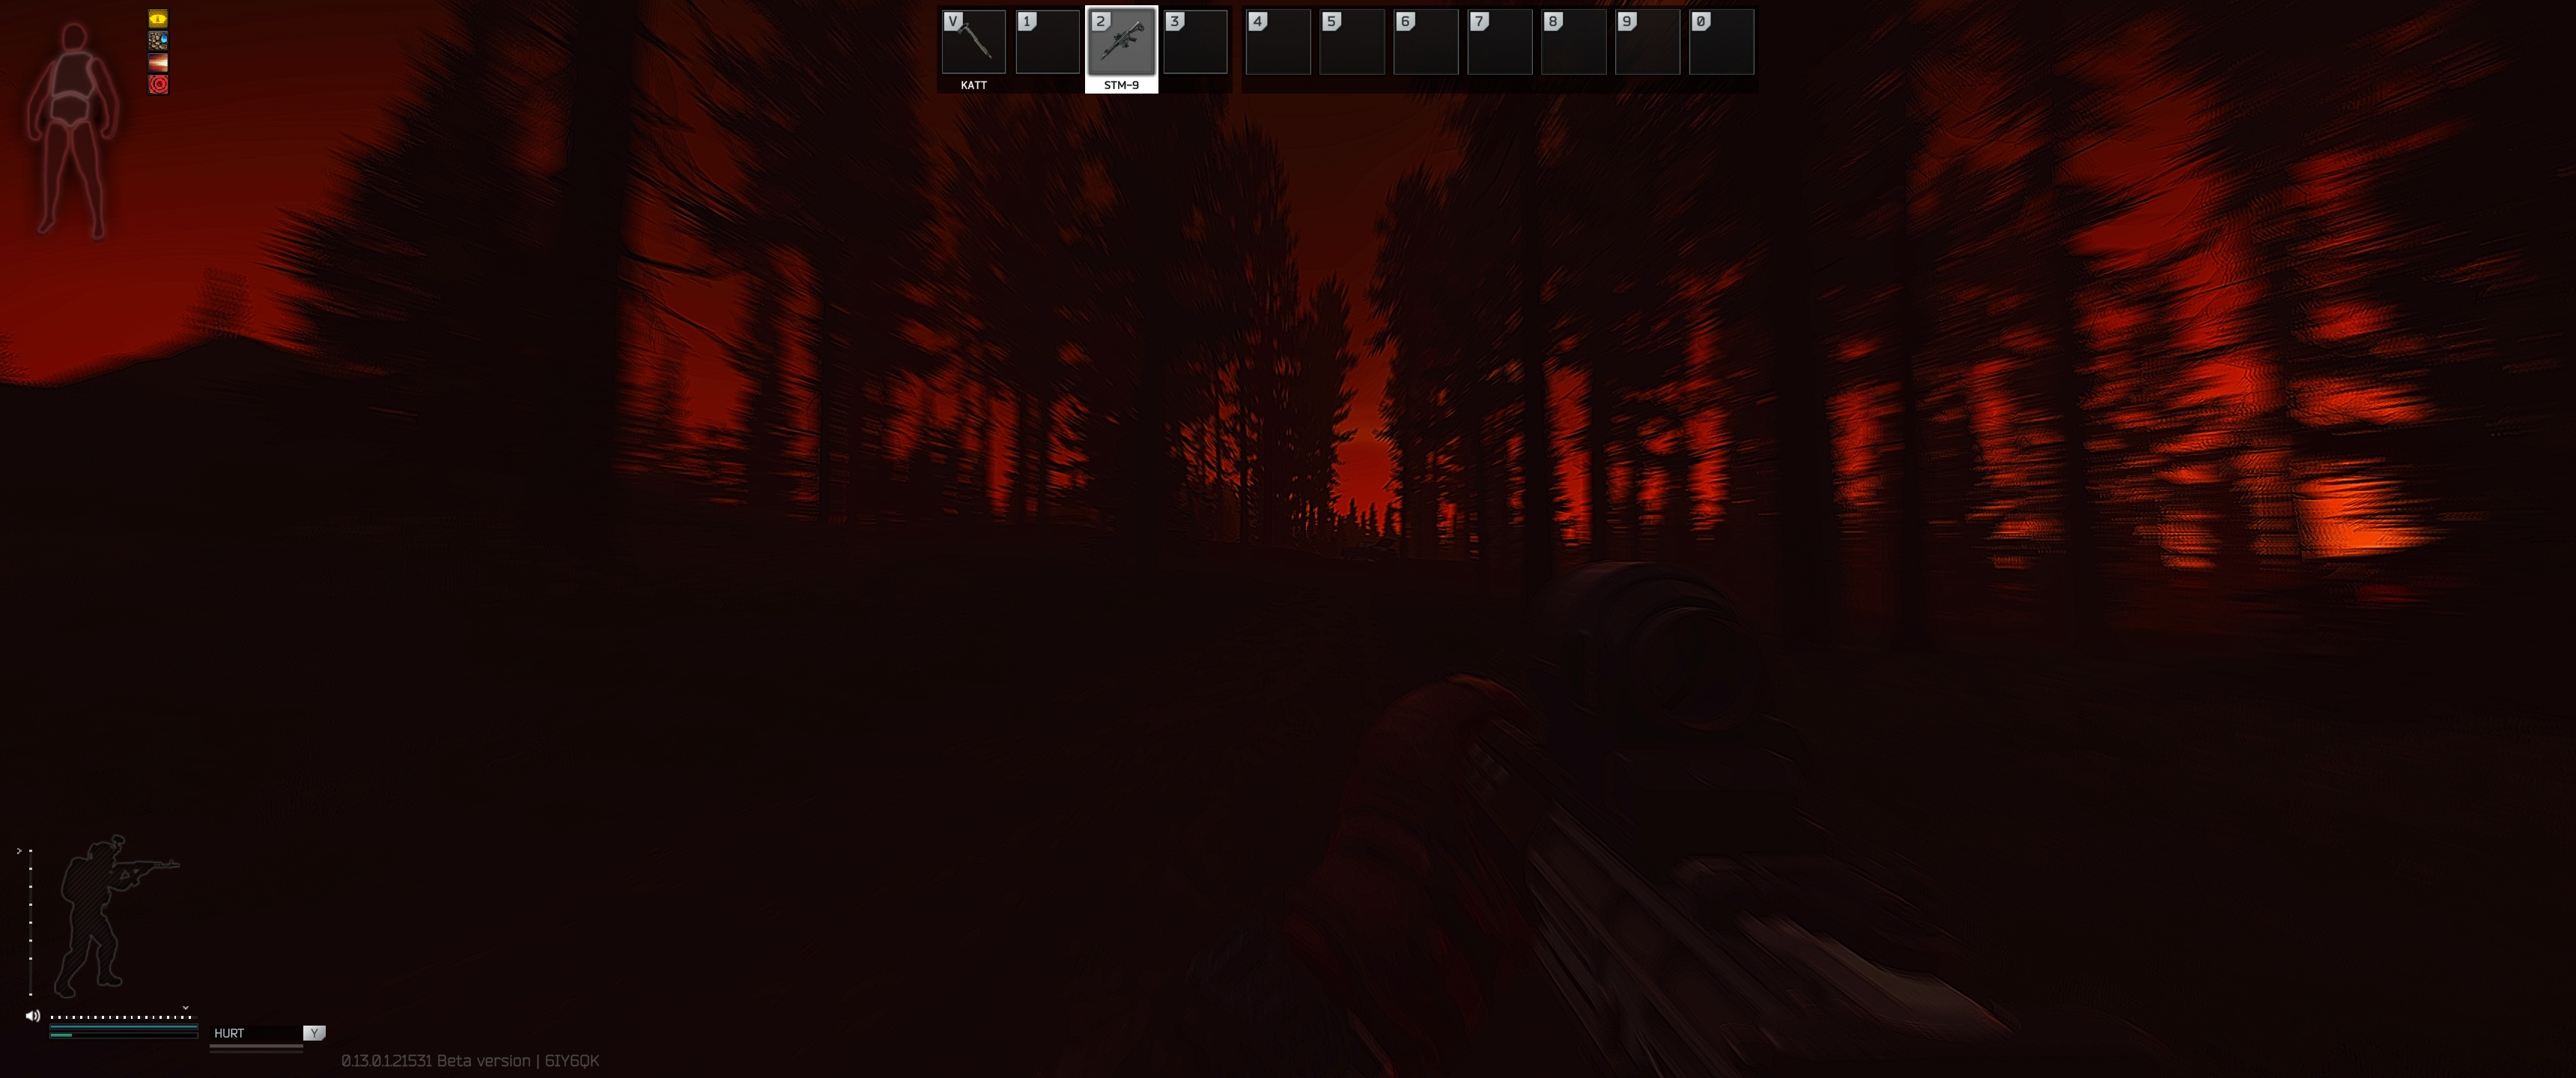 (Running across an unknown map while badly injured is really scary especially when it gets dark.)